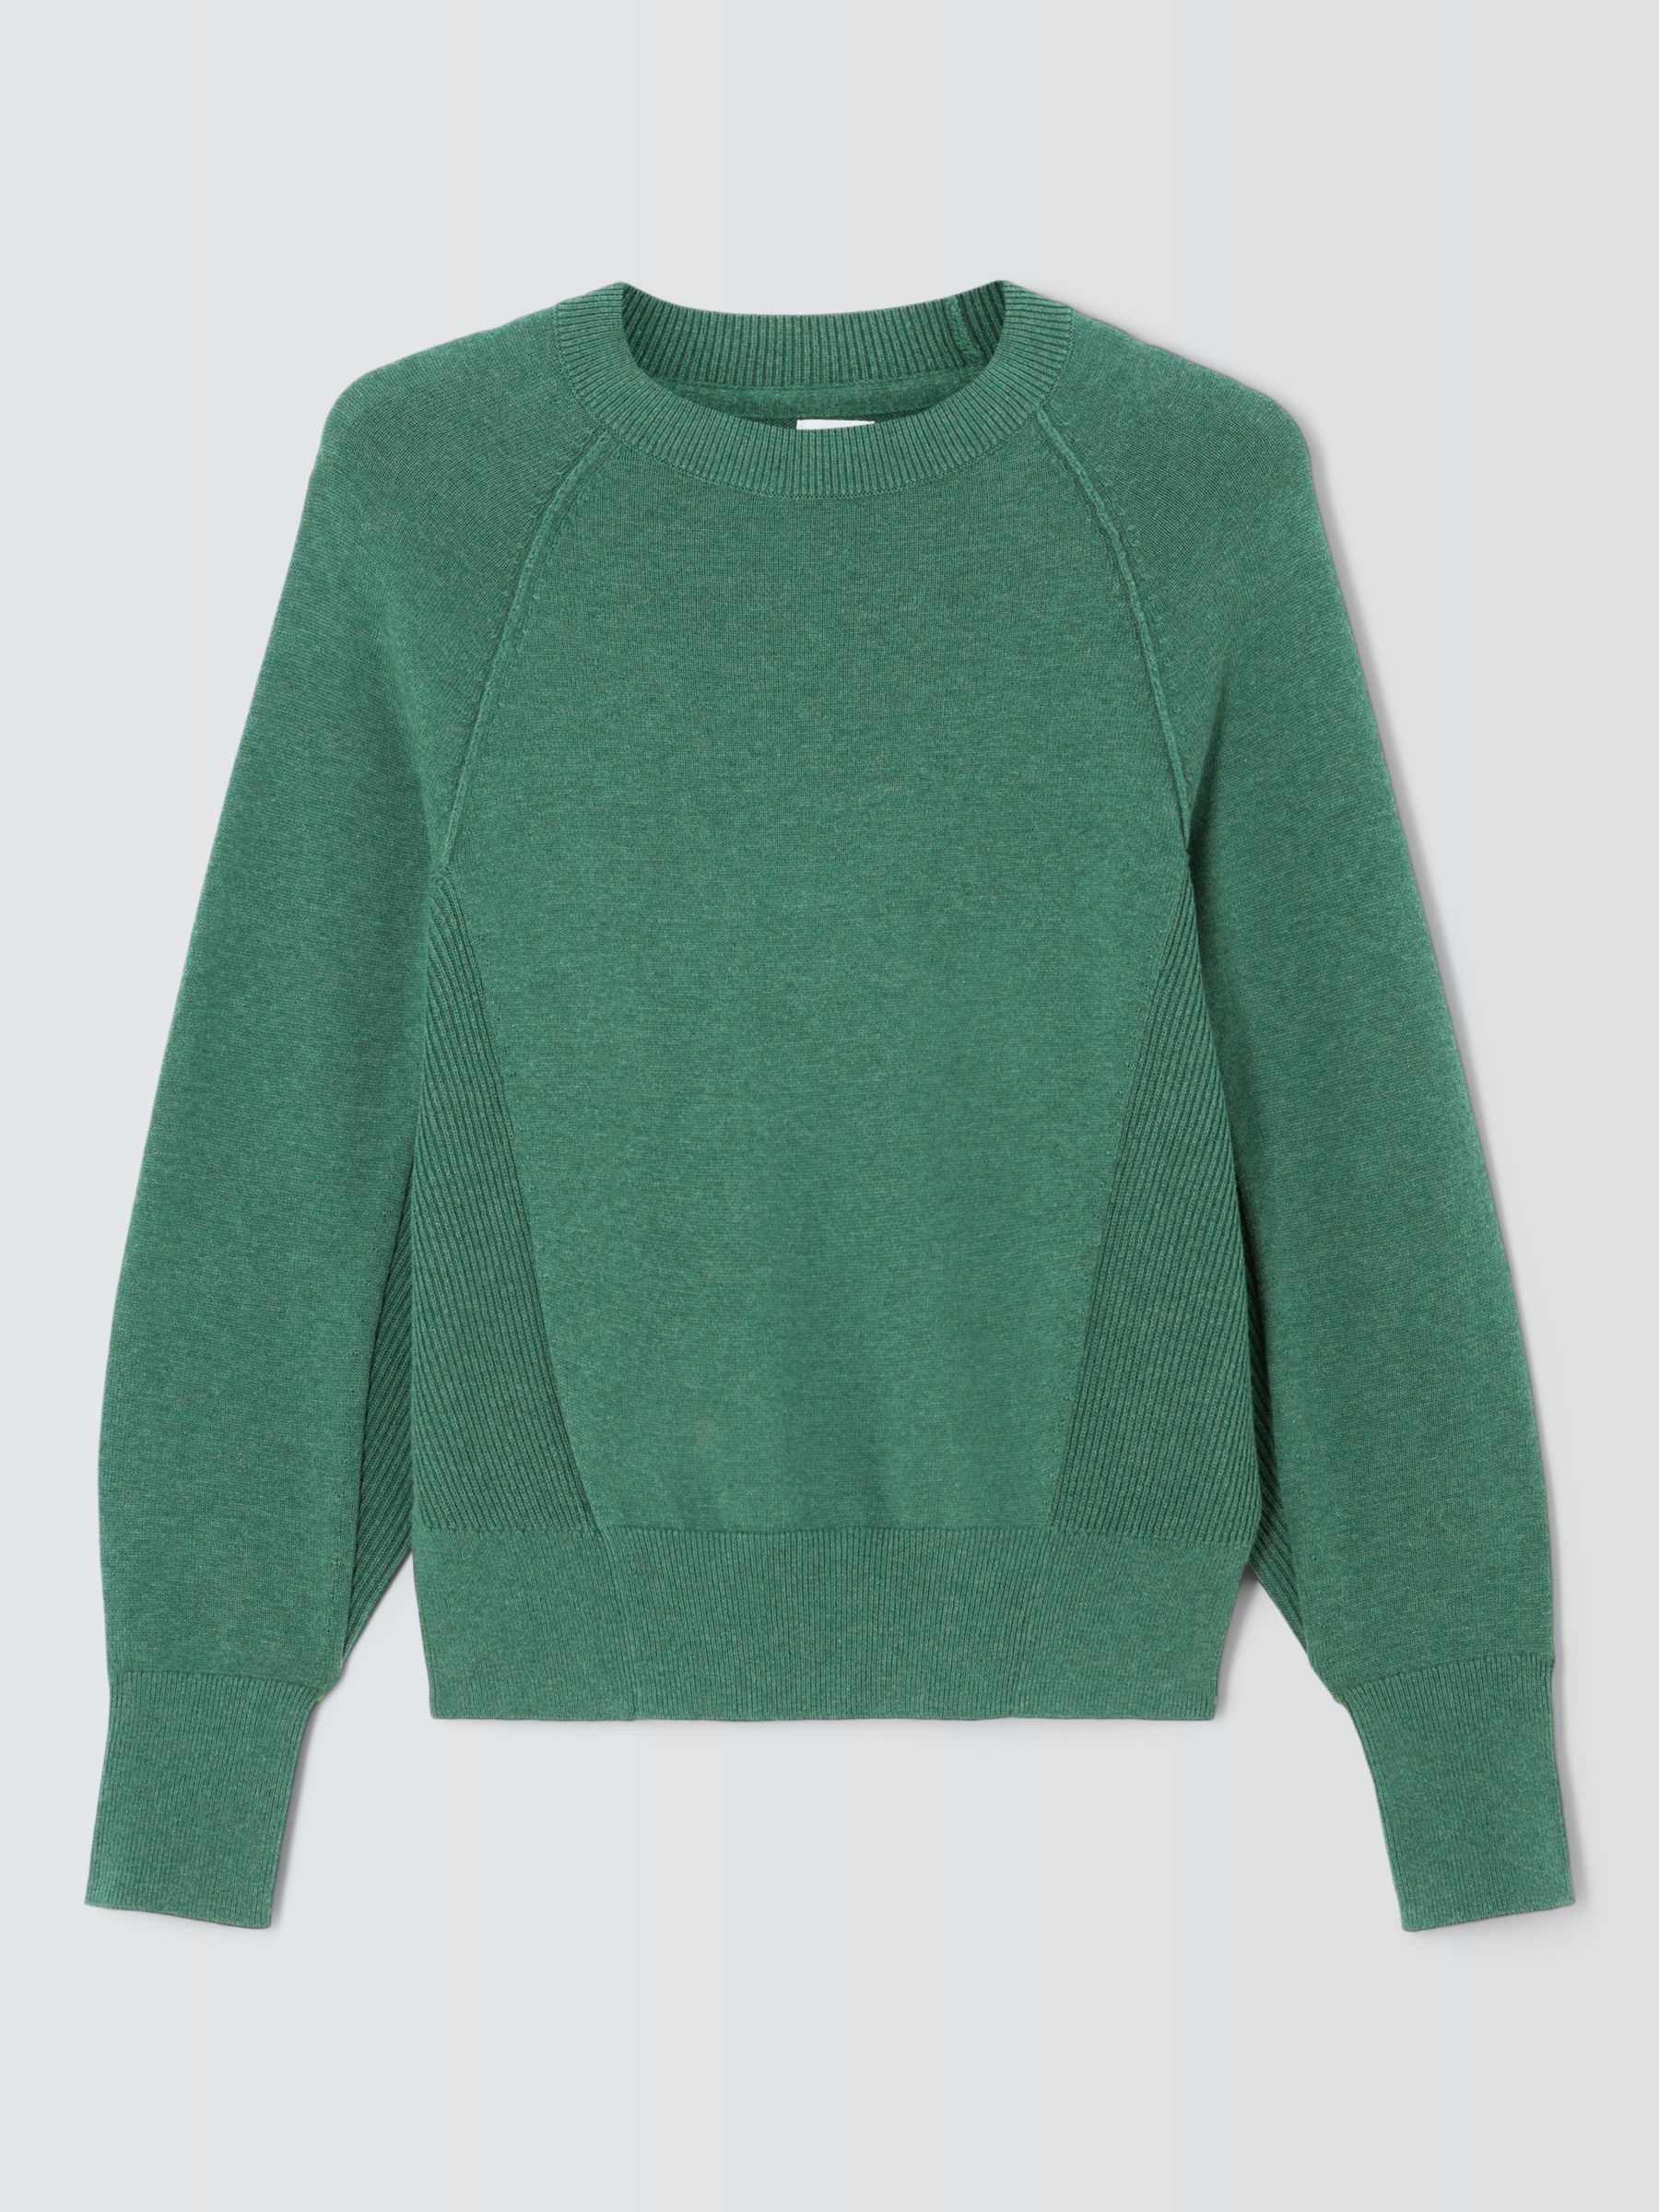 Buy John Lewis Cotton Knitted Sweater Online at johnlewis.com